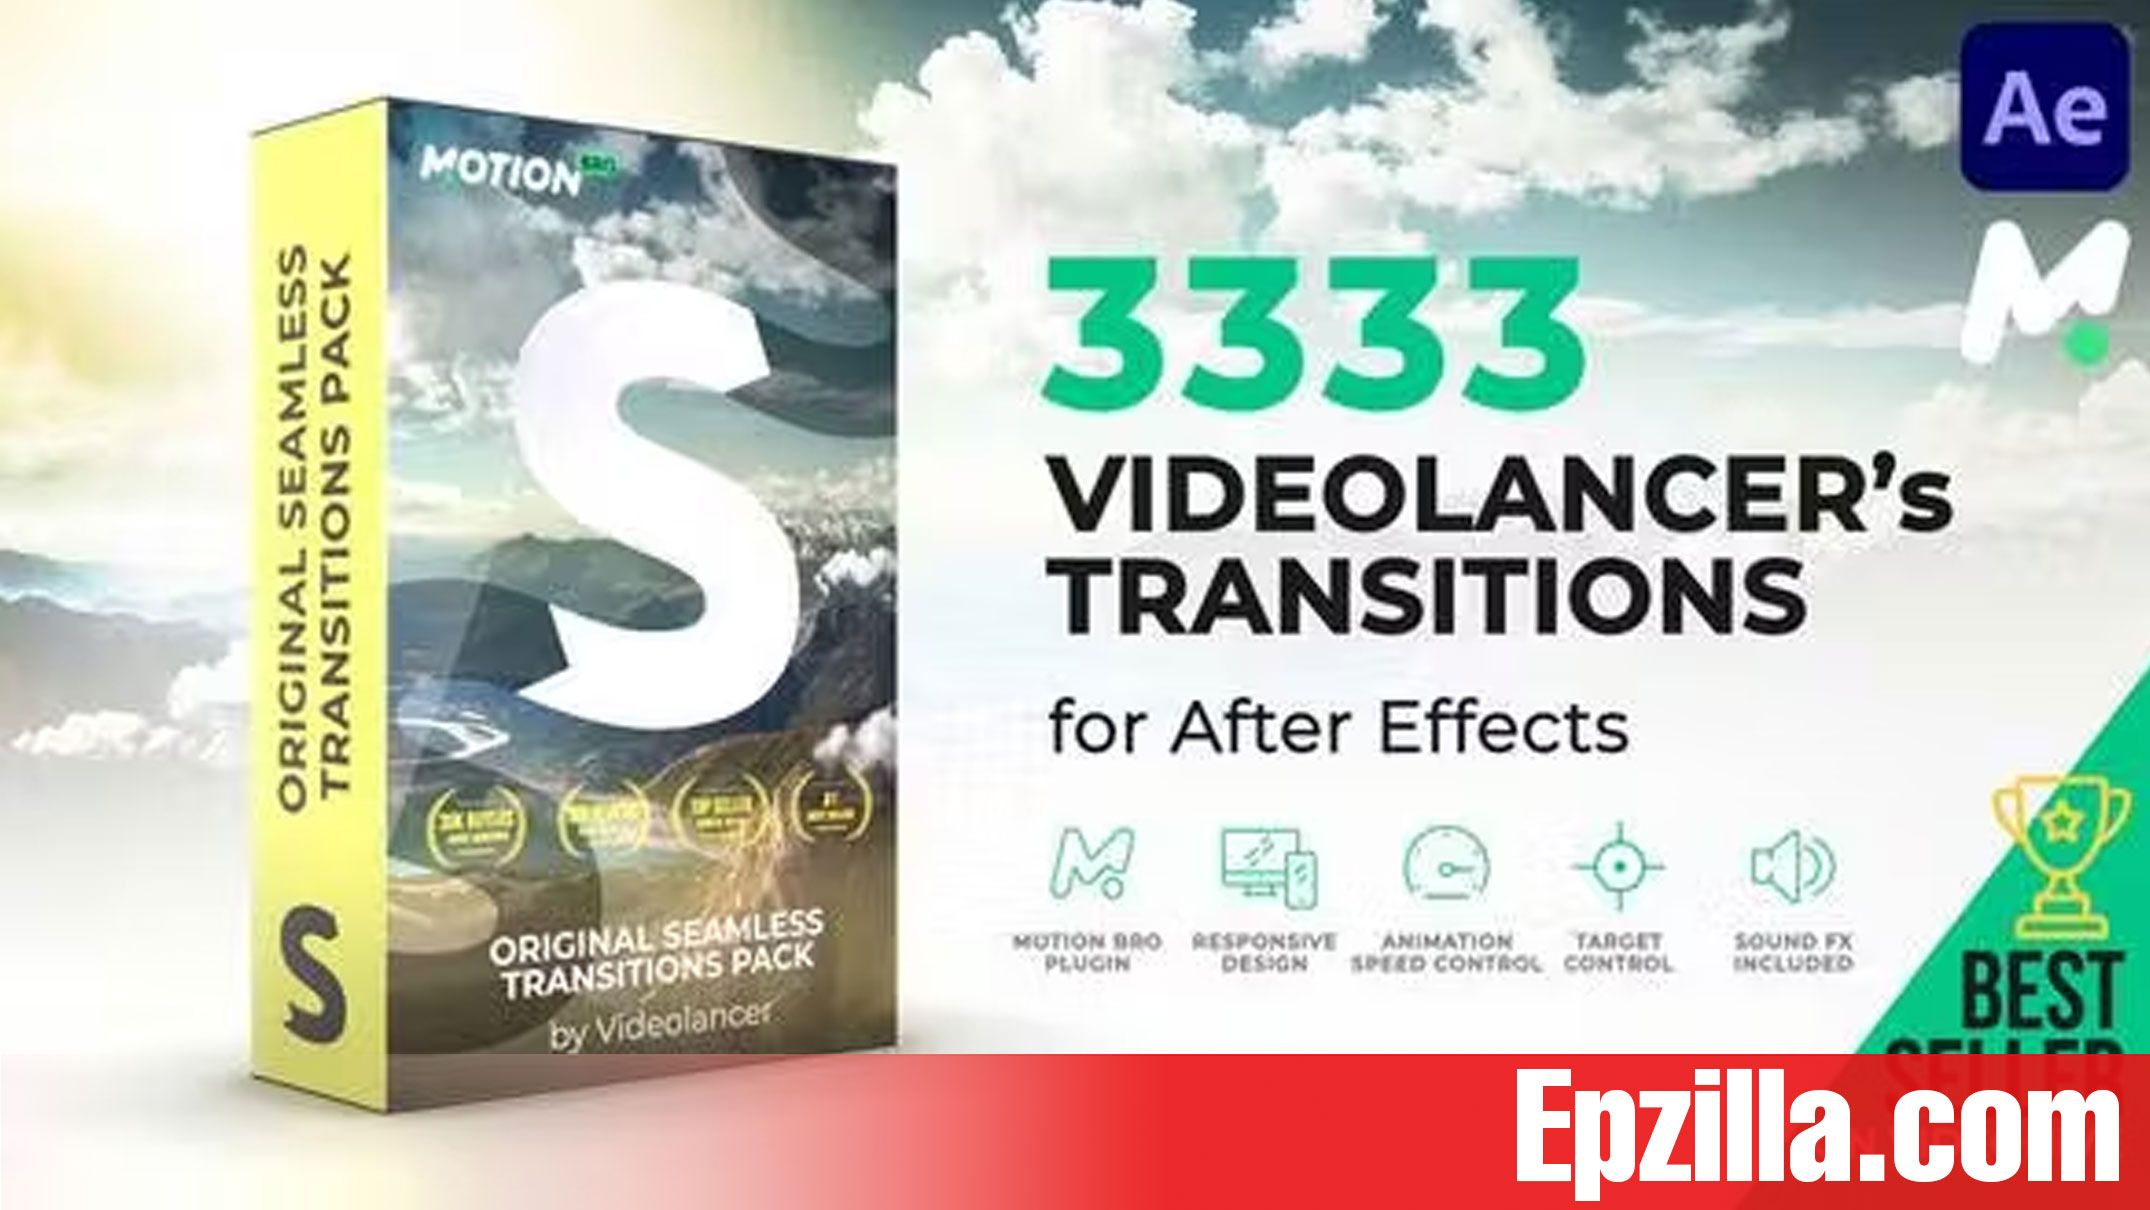 Videohive Handy Seamless Transitions Pack for After Effects 18967340 Free Download Epzilla.com